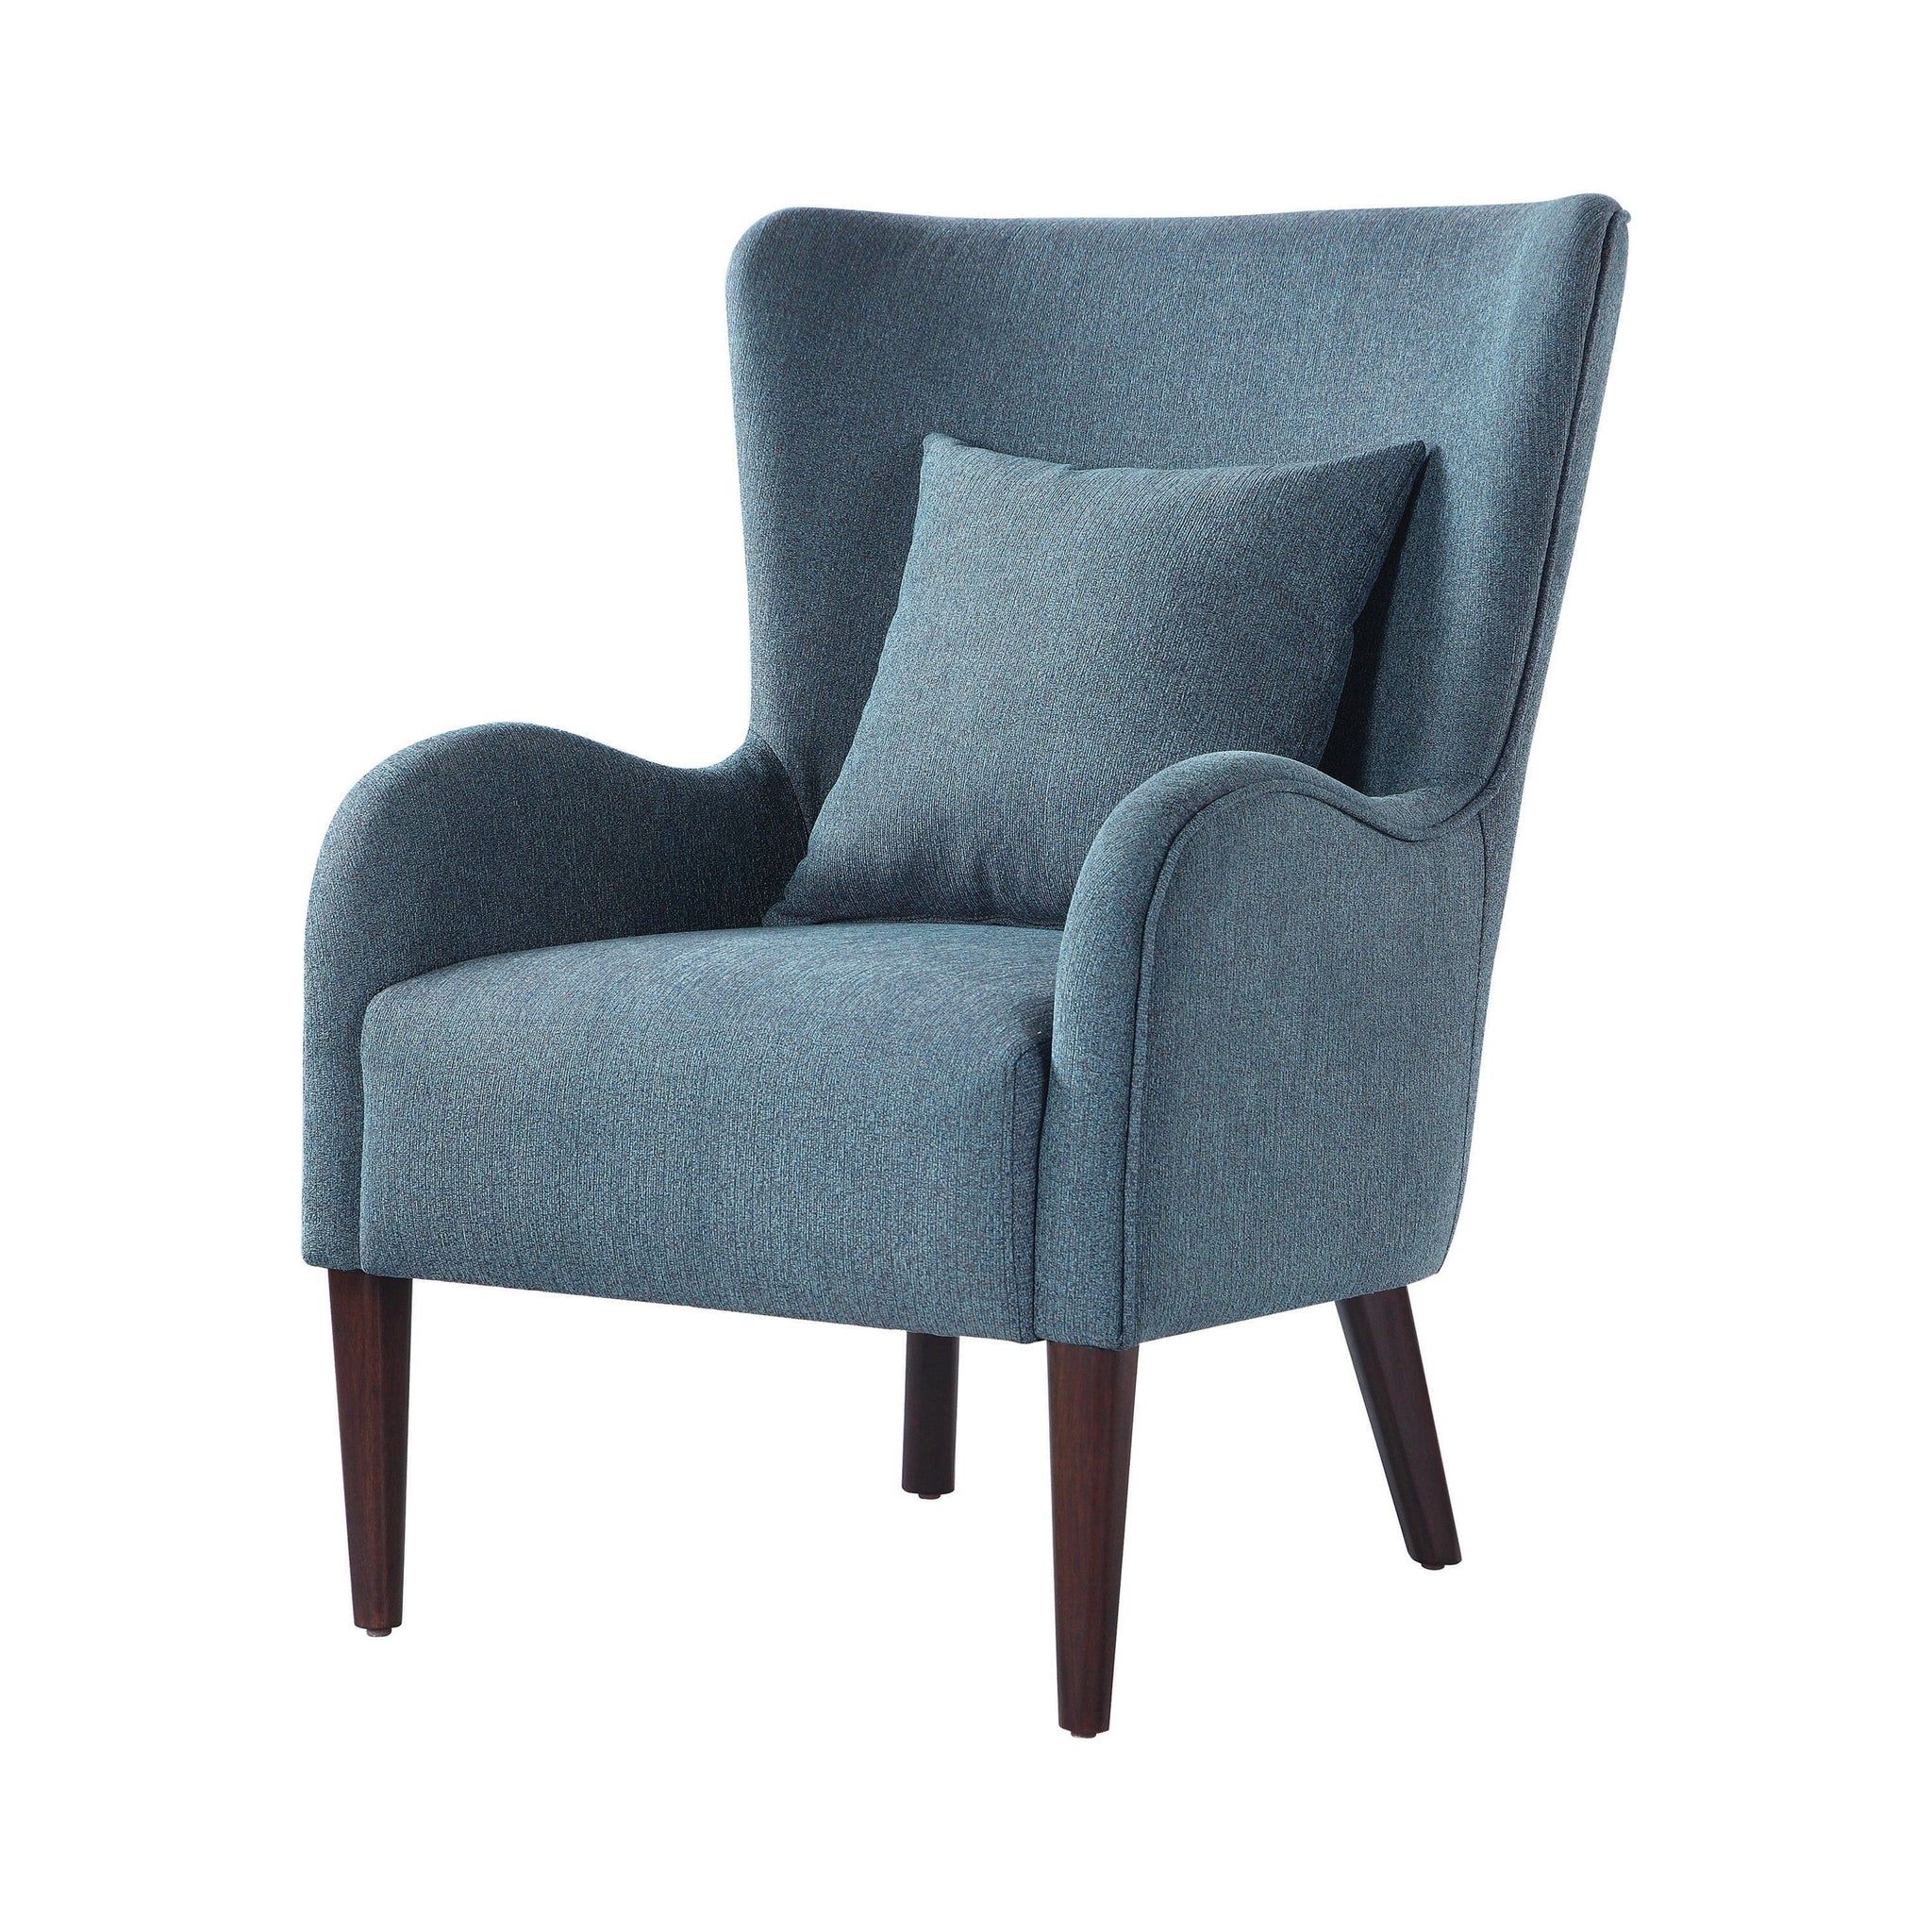 Curved Arm Upholstered Accent Chair Blue - 903963